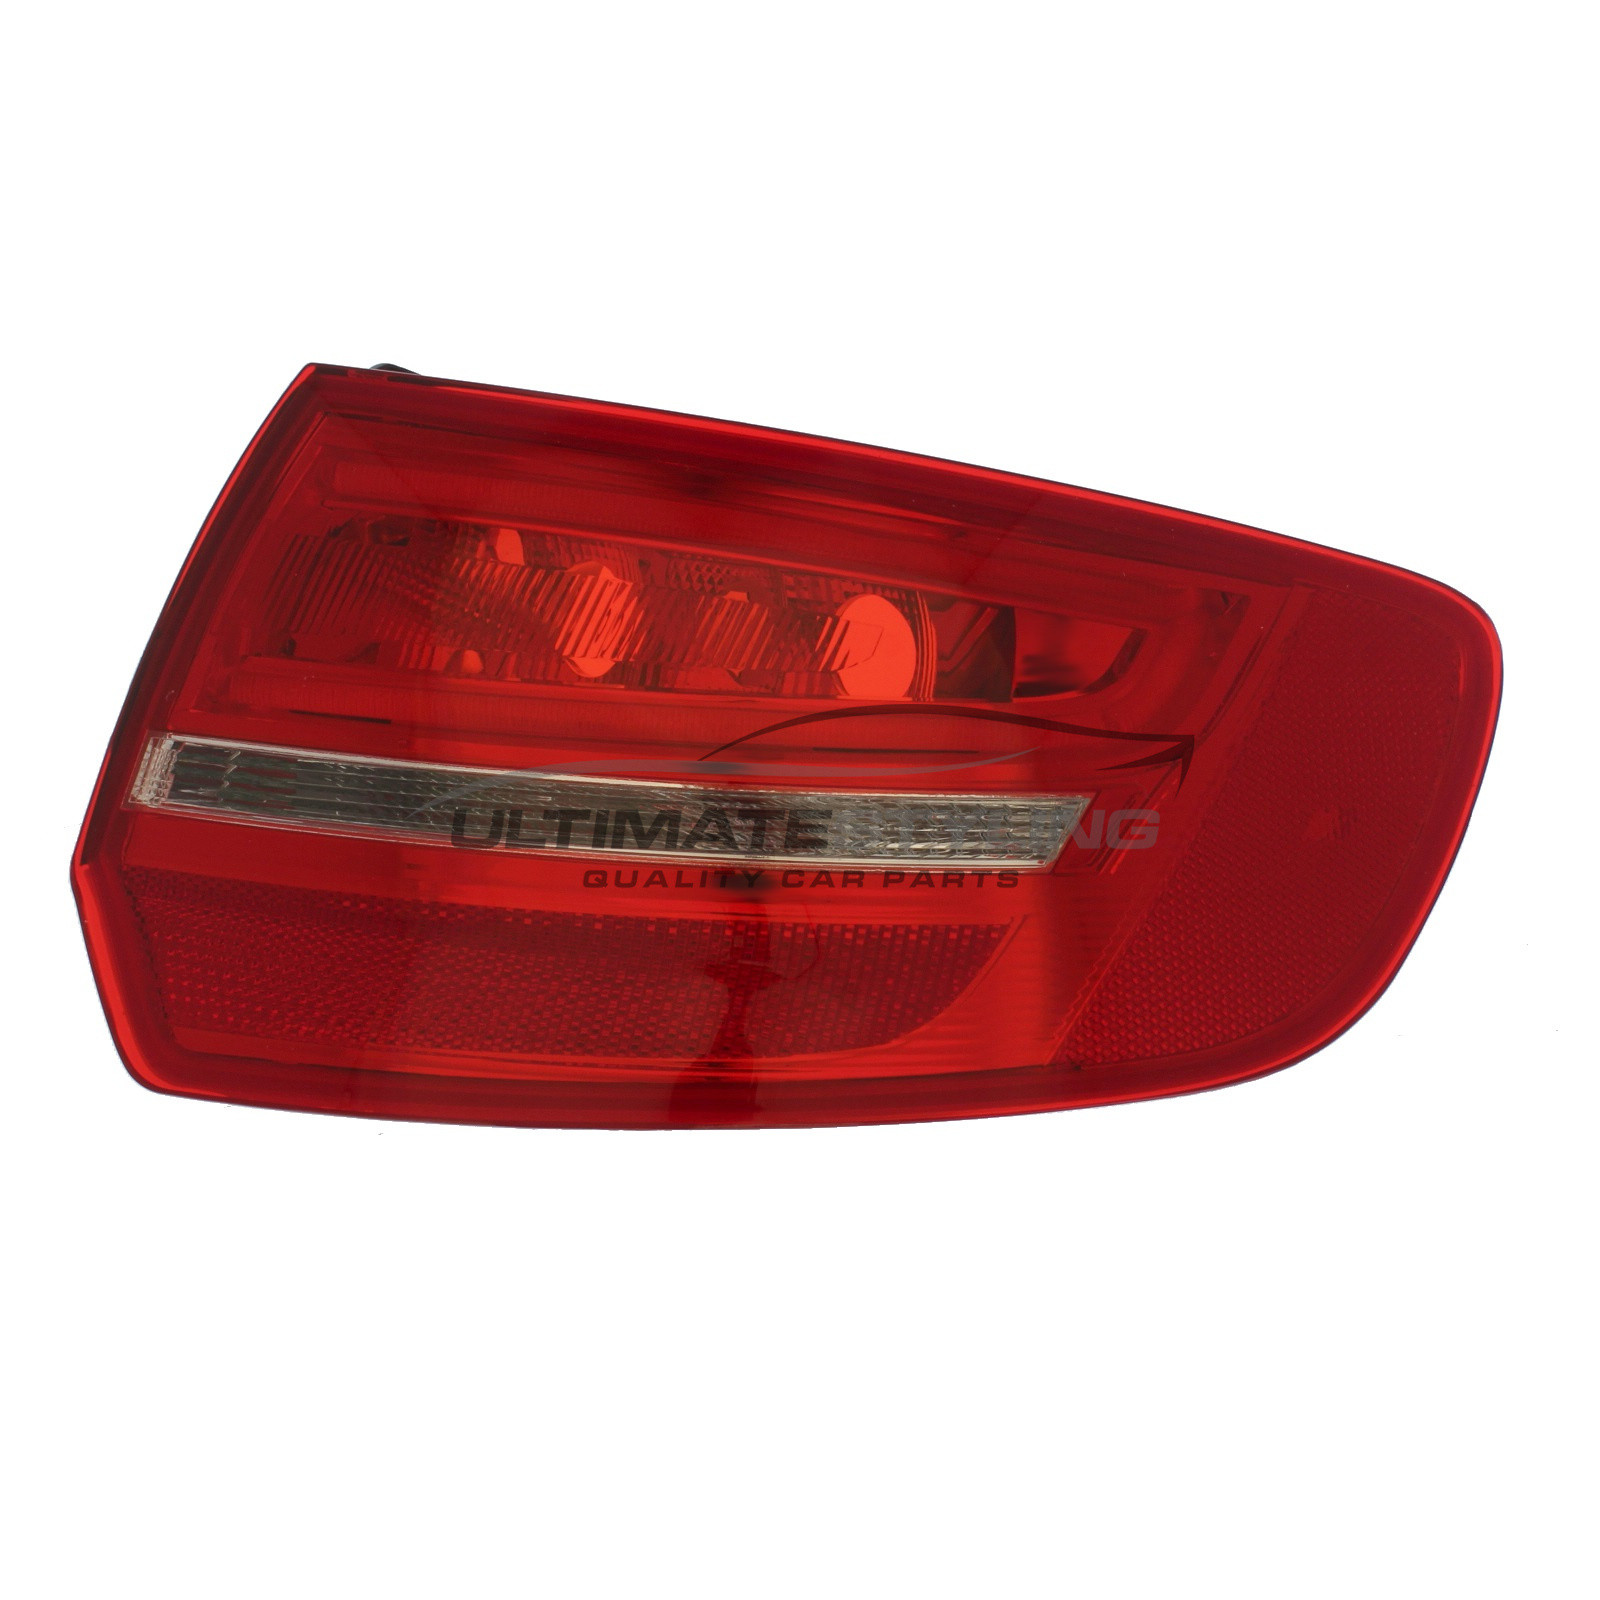 Audi A3 2008-2013 / Audi RS3 2011-2013 / Audi S3 2006-2013 LED Outer (Wing) Rear Light / Tail Light Excluding Bulb Holder Drivers Side (RH)